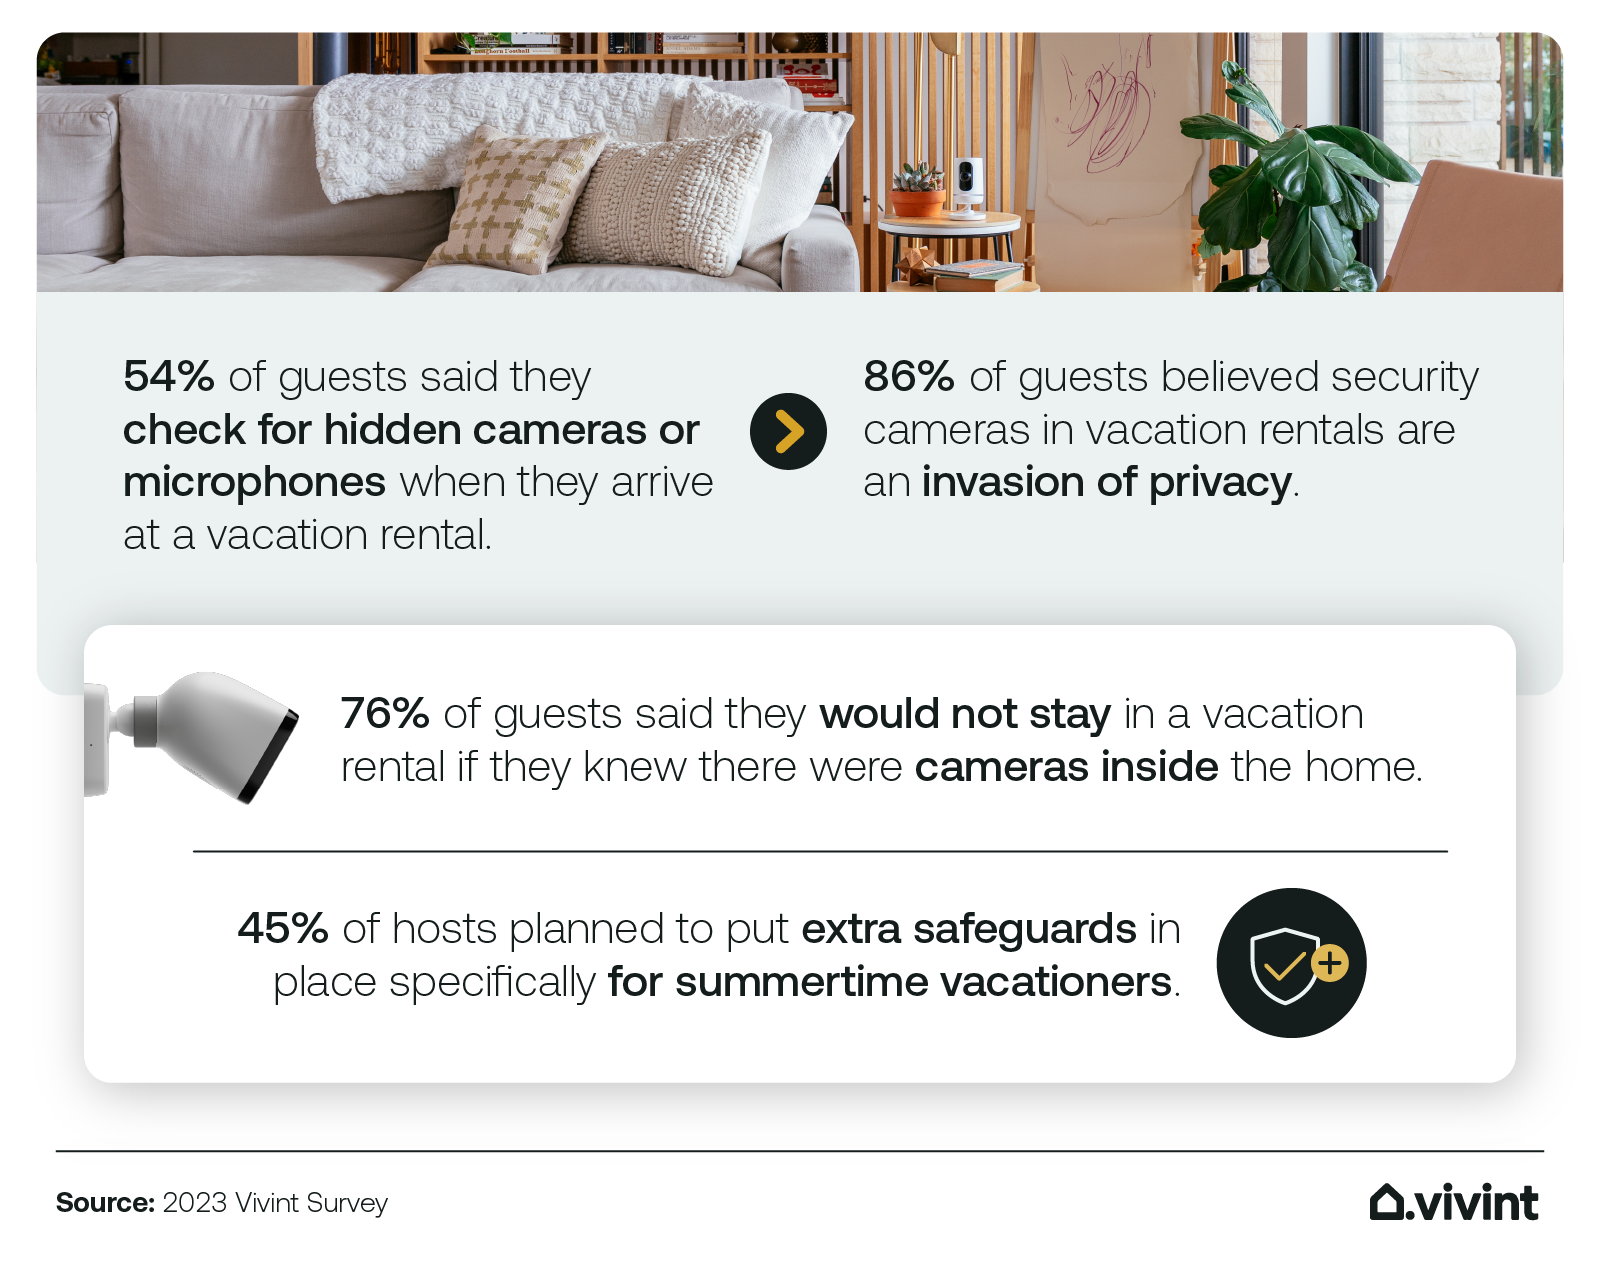 Informatino about how many guests check for security cameras when renting a vacation property.